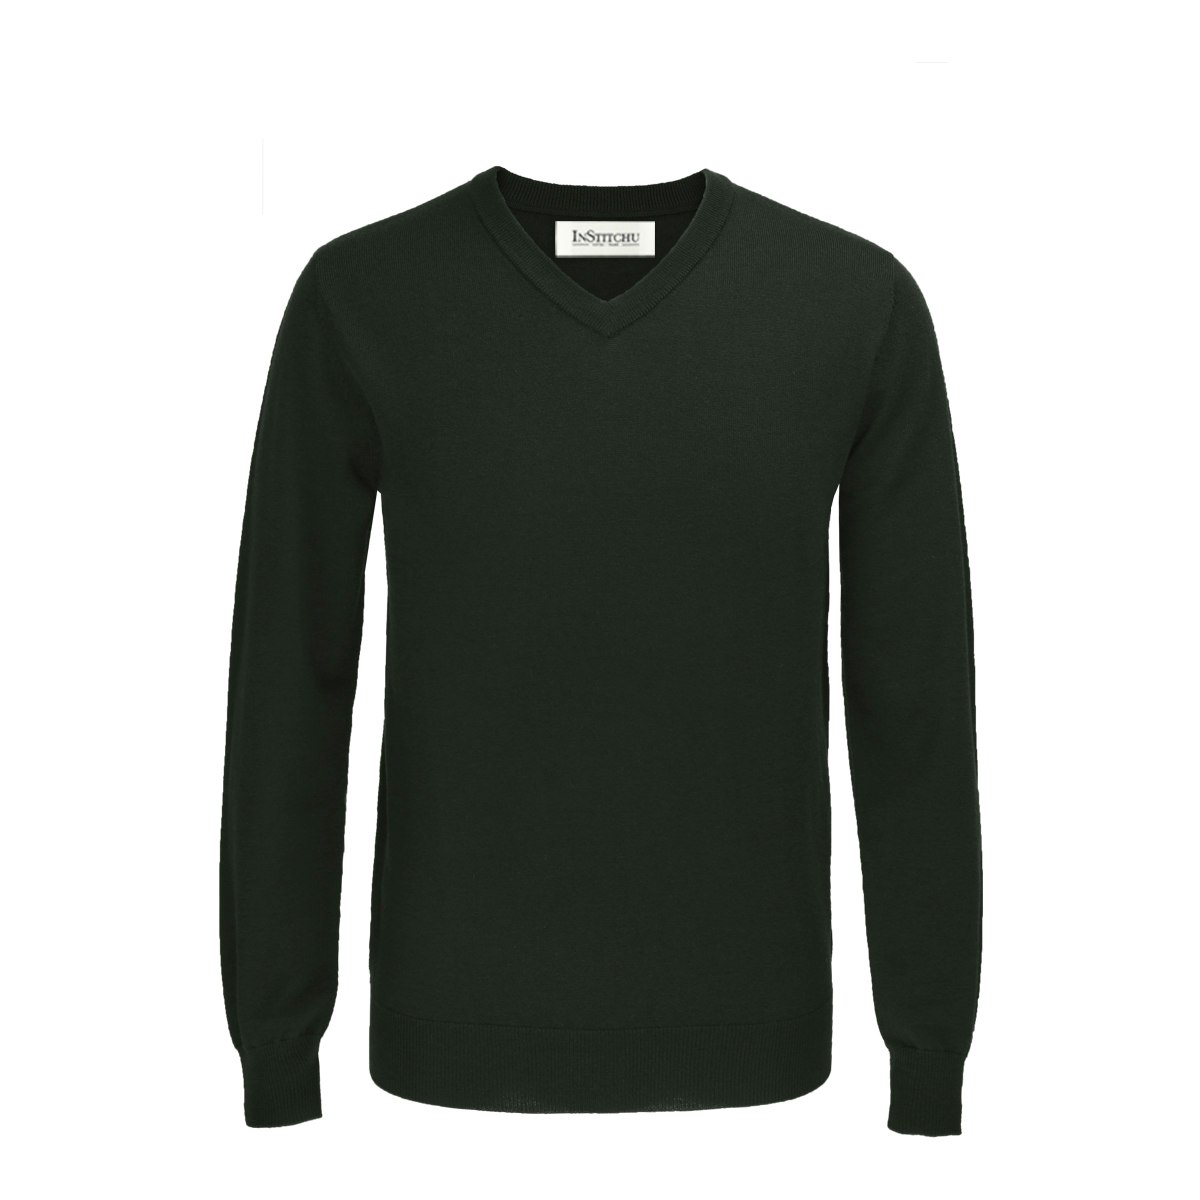 The Newman Green V-Neck Wool Sweater